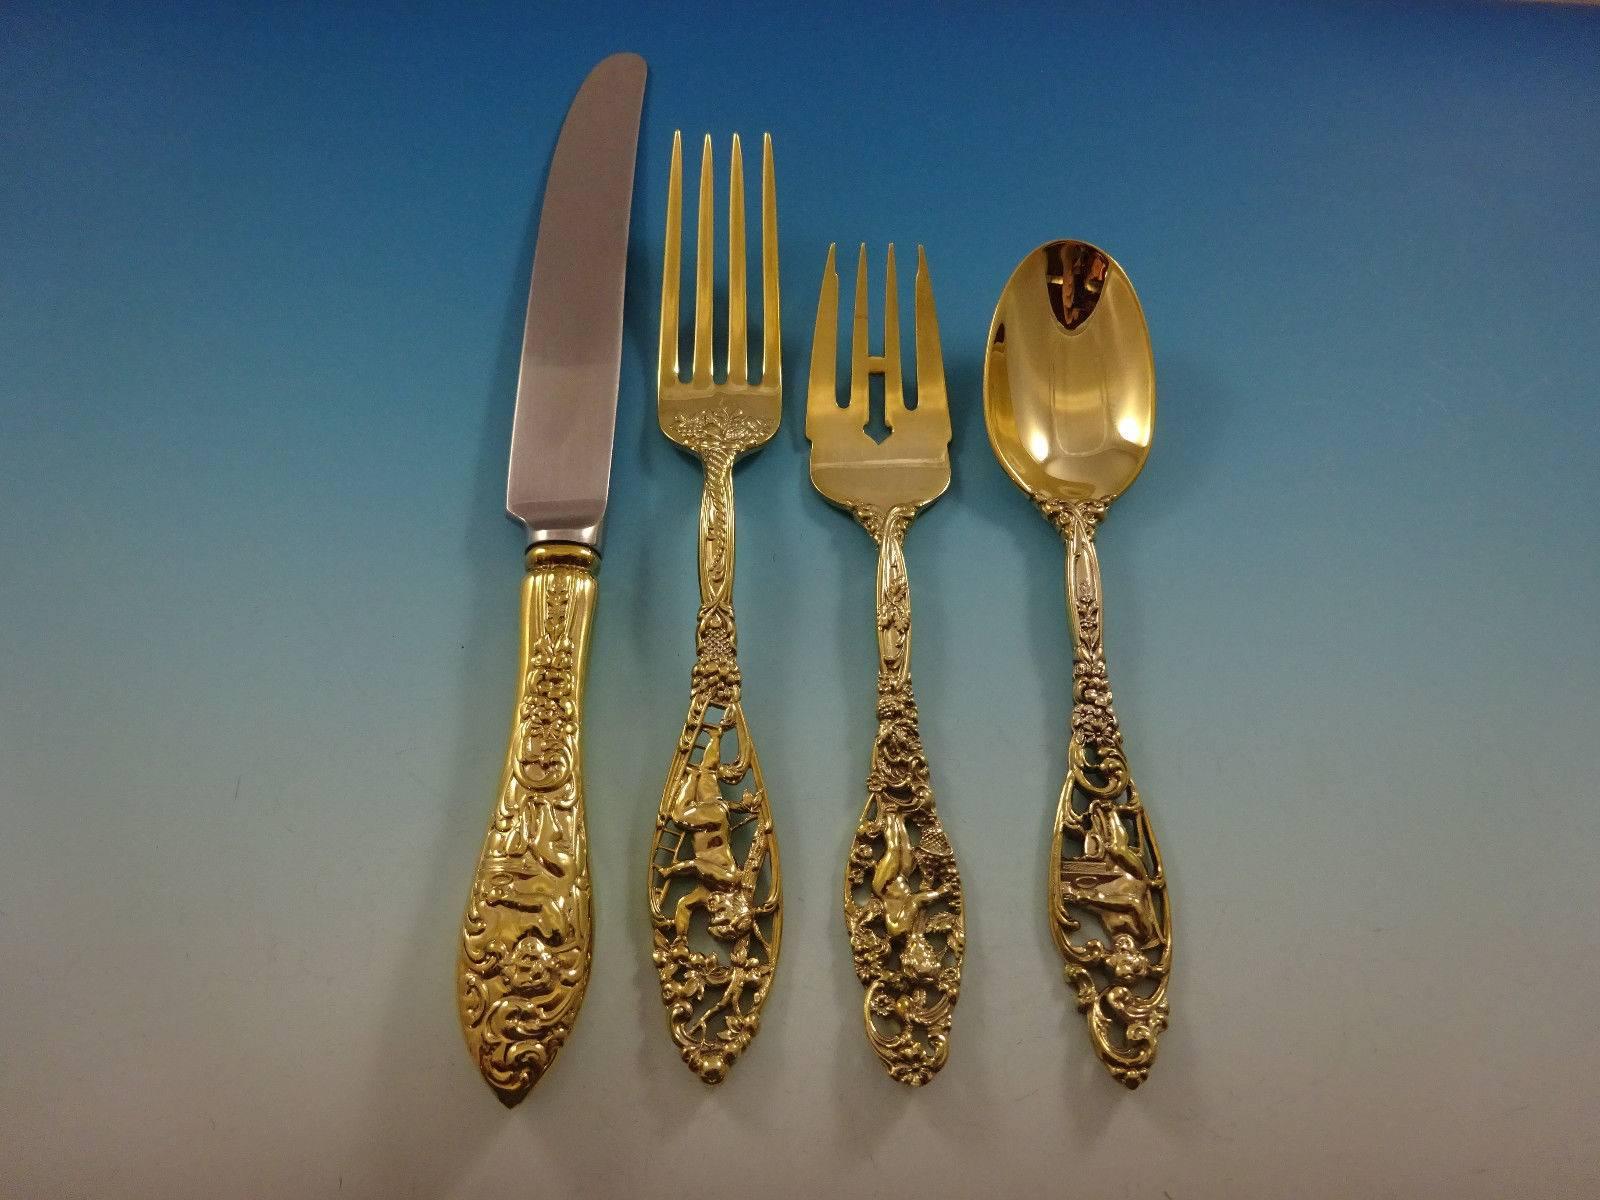 Add some luxe to your life with this fabulous labors of cupid gold by Dominick and haff sterling silver flatware set of 32-piece. Gold flatware is on trend and makes a bold statement on your table. 

This set is vermeil (completely gold-washed)